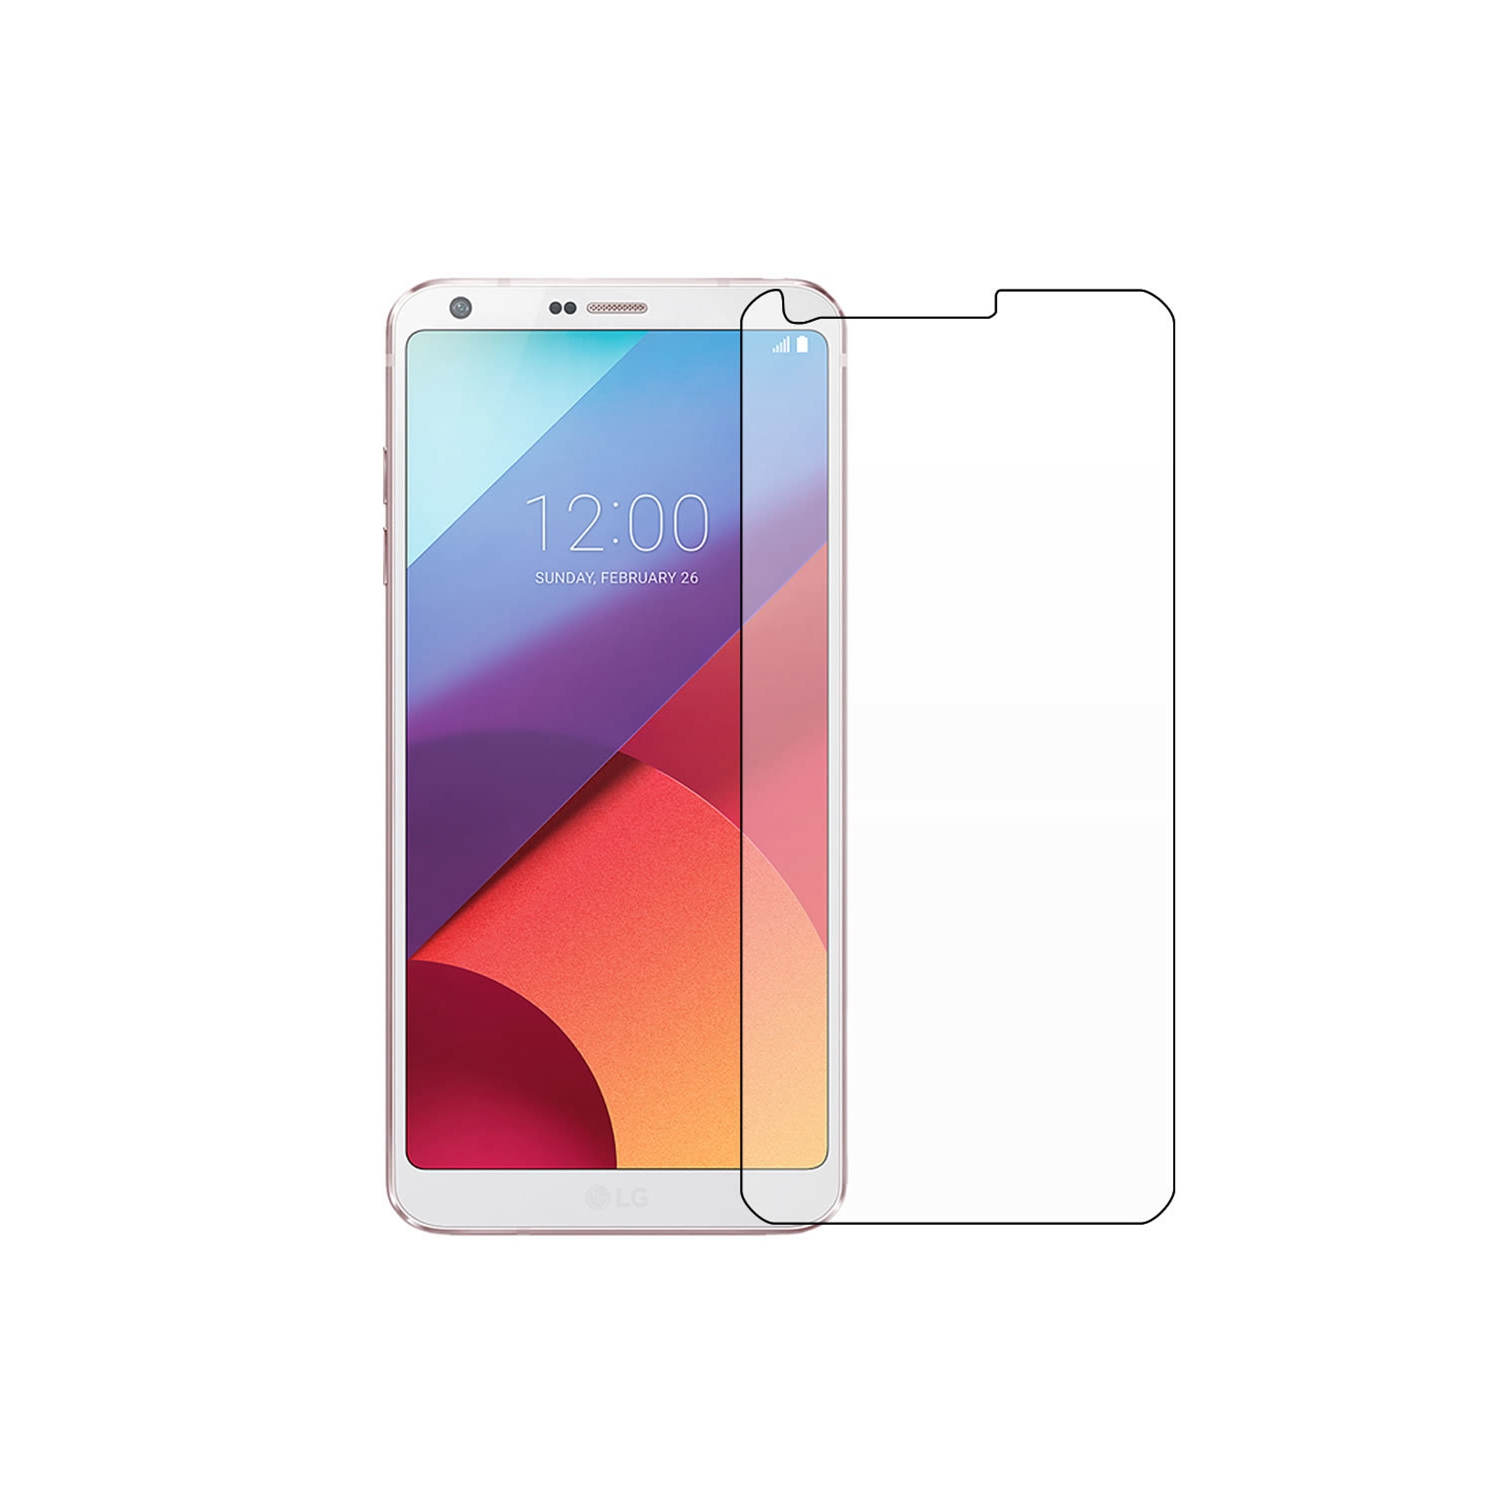 【2 Packs】 CSmart Premium Tempered Glass Screen Protector for LG G6, Case Friendly & Bubble Free